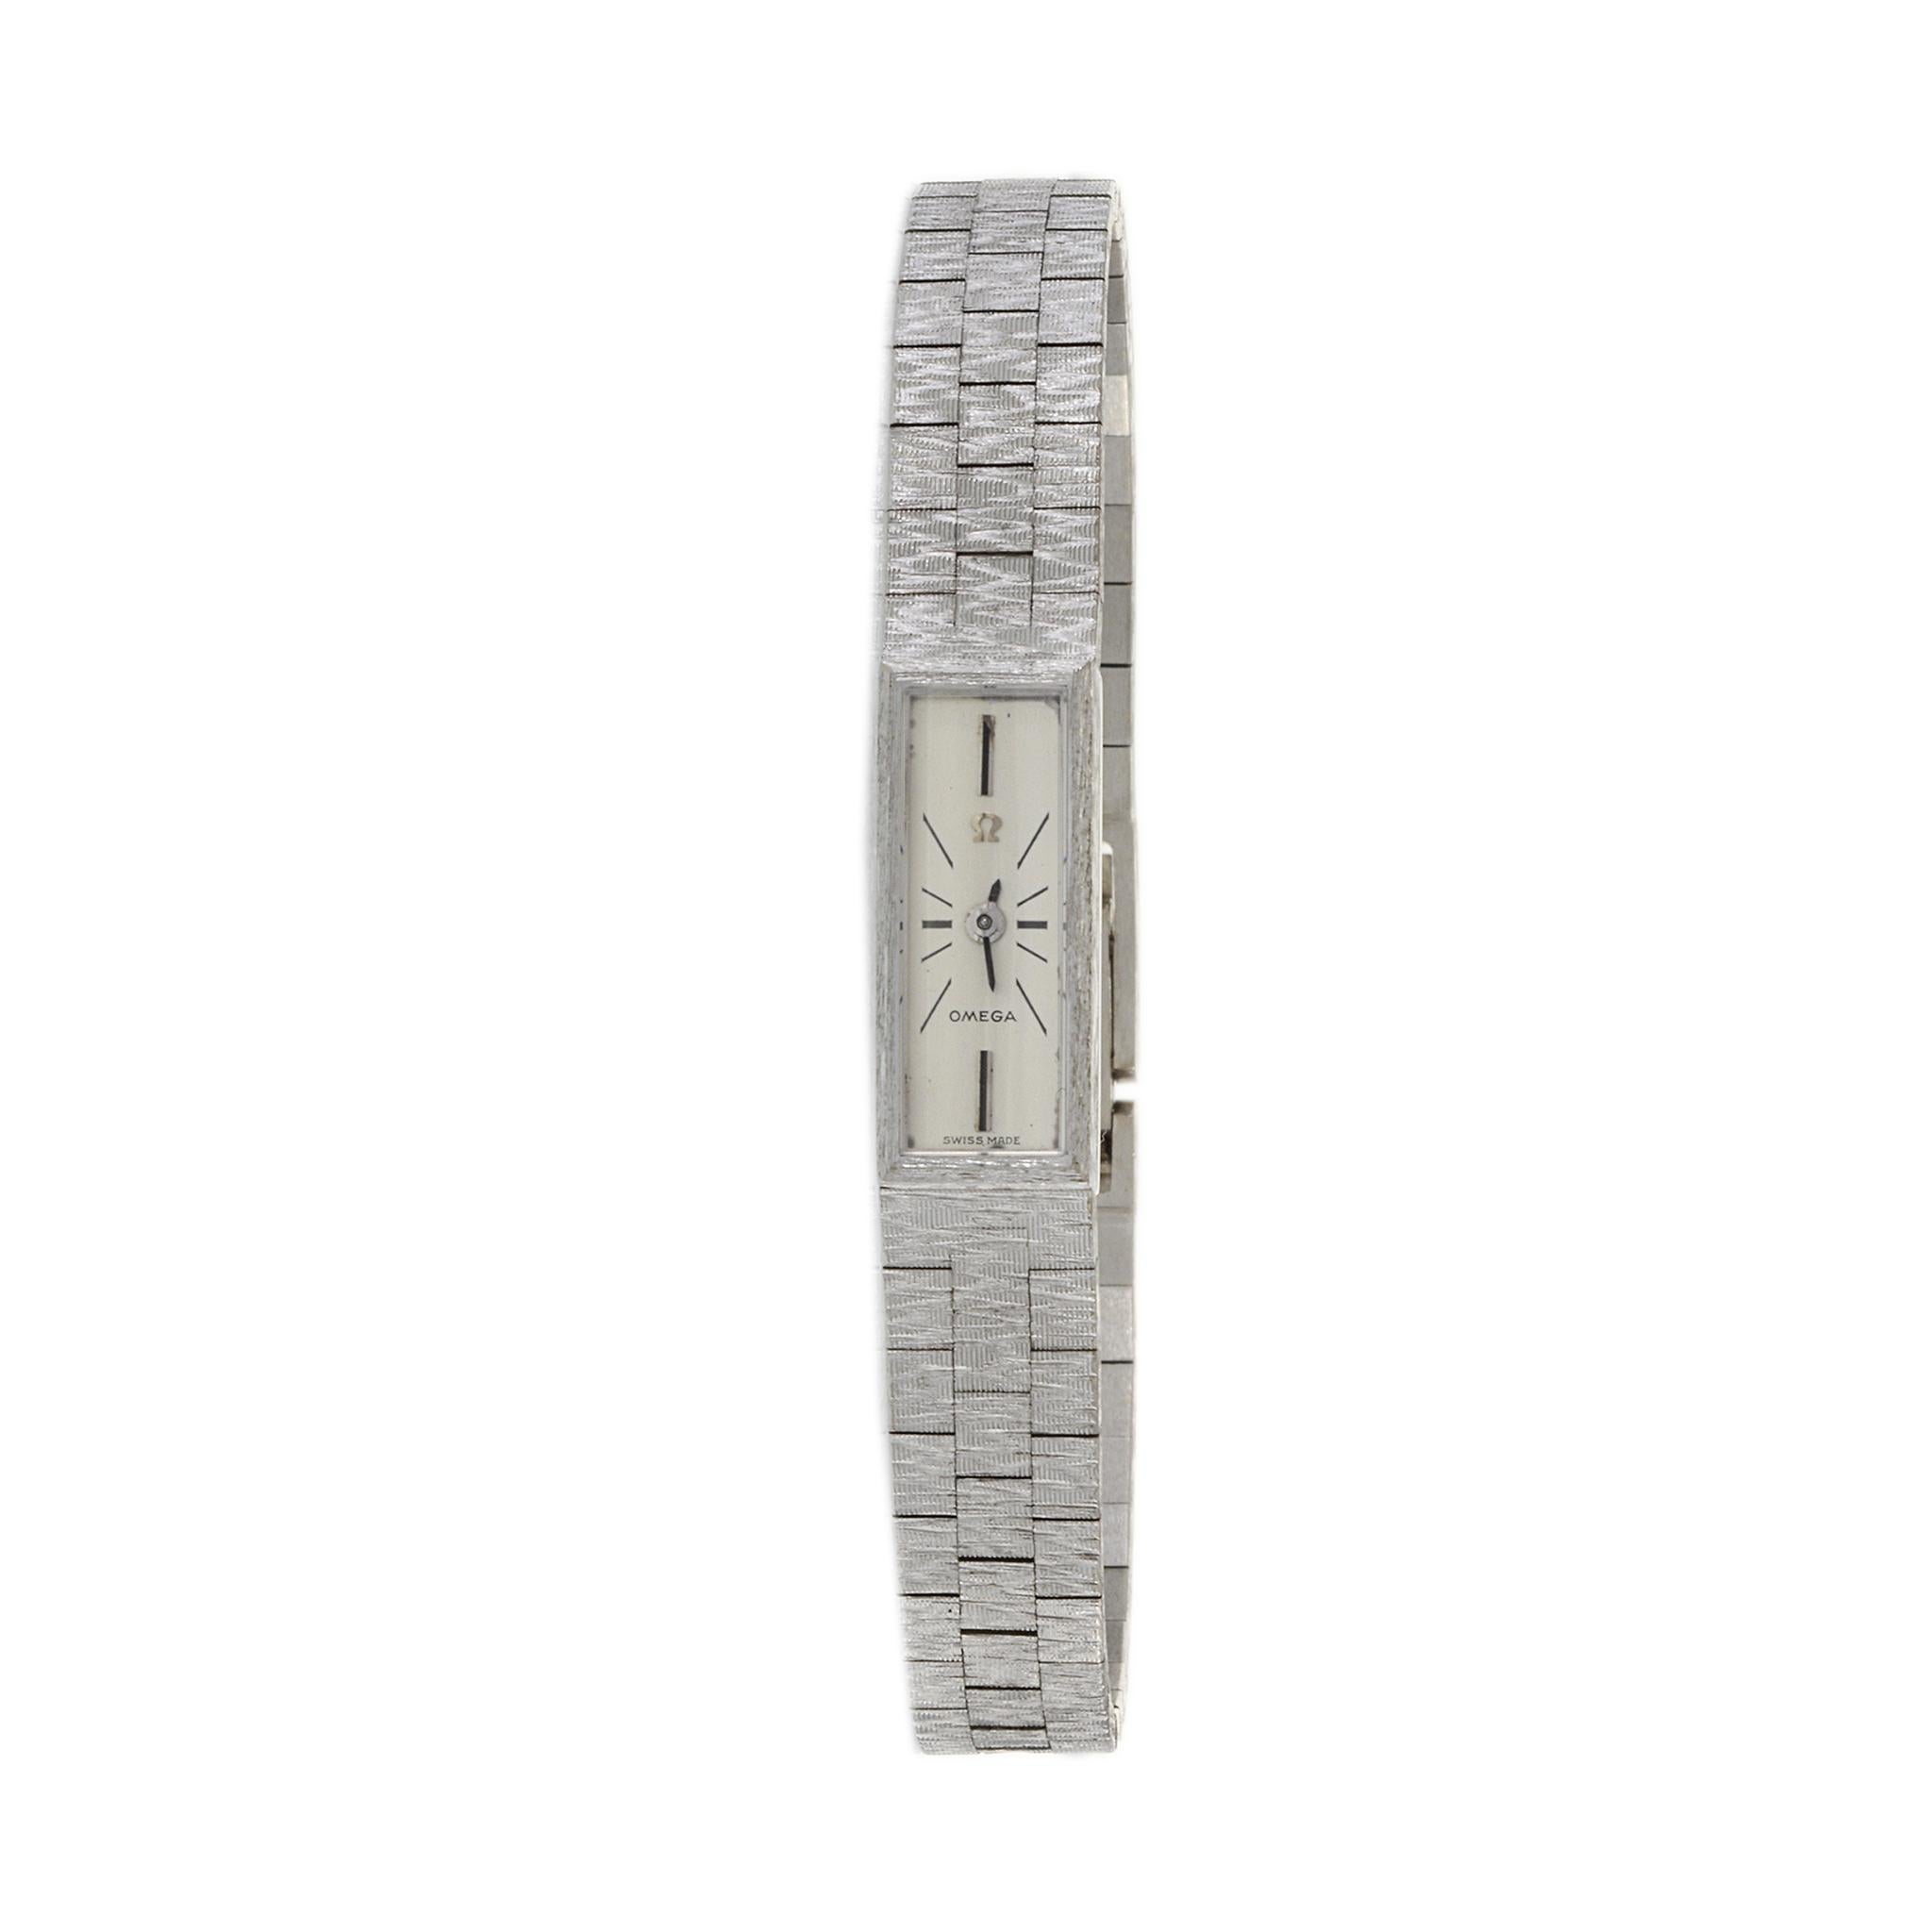 Introducing the Omega 1960s Cocktail Watch, a timeless symbol of elegance and sophistication. Crafted with meticulous attention to detail, this exquisite timepiece features an 18kt white gold rectangular case and matching bracelet, each adorned with